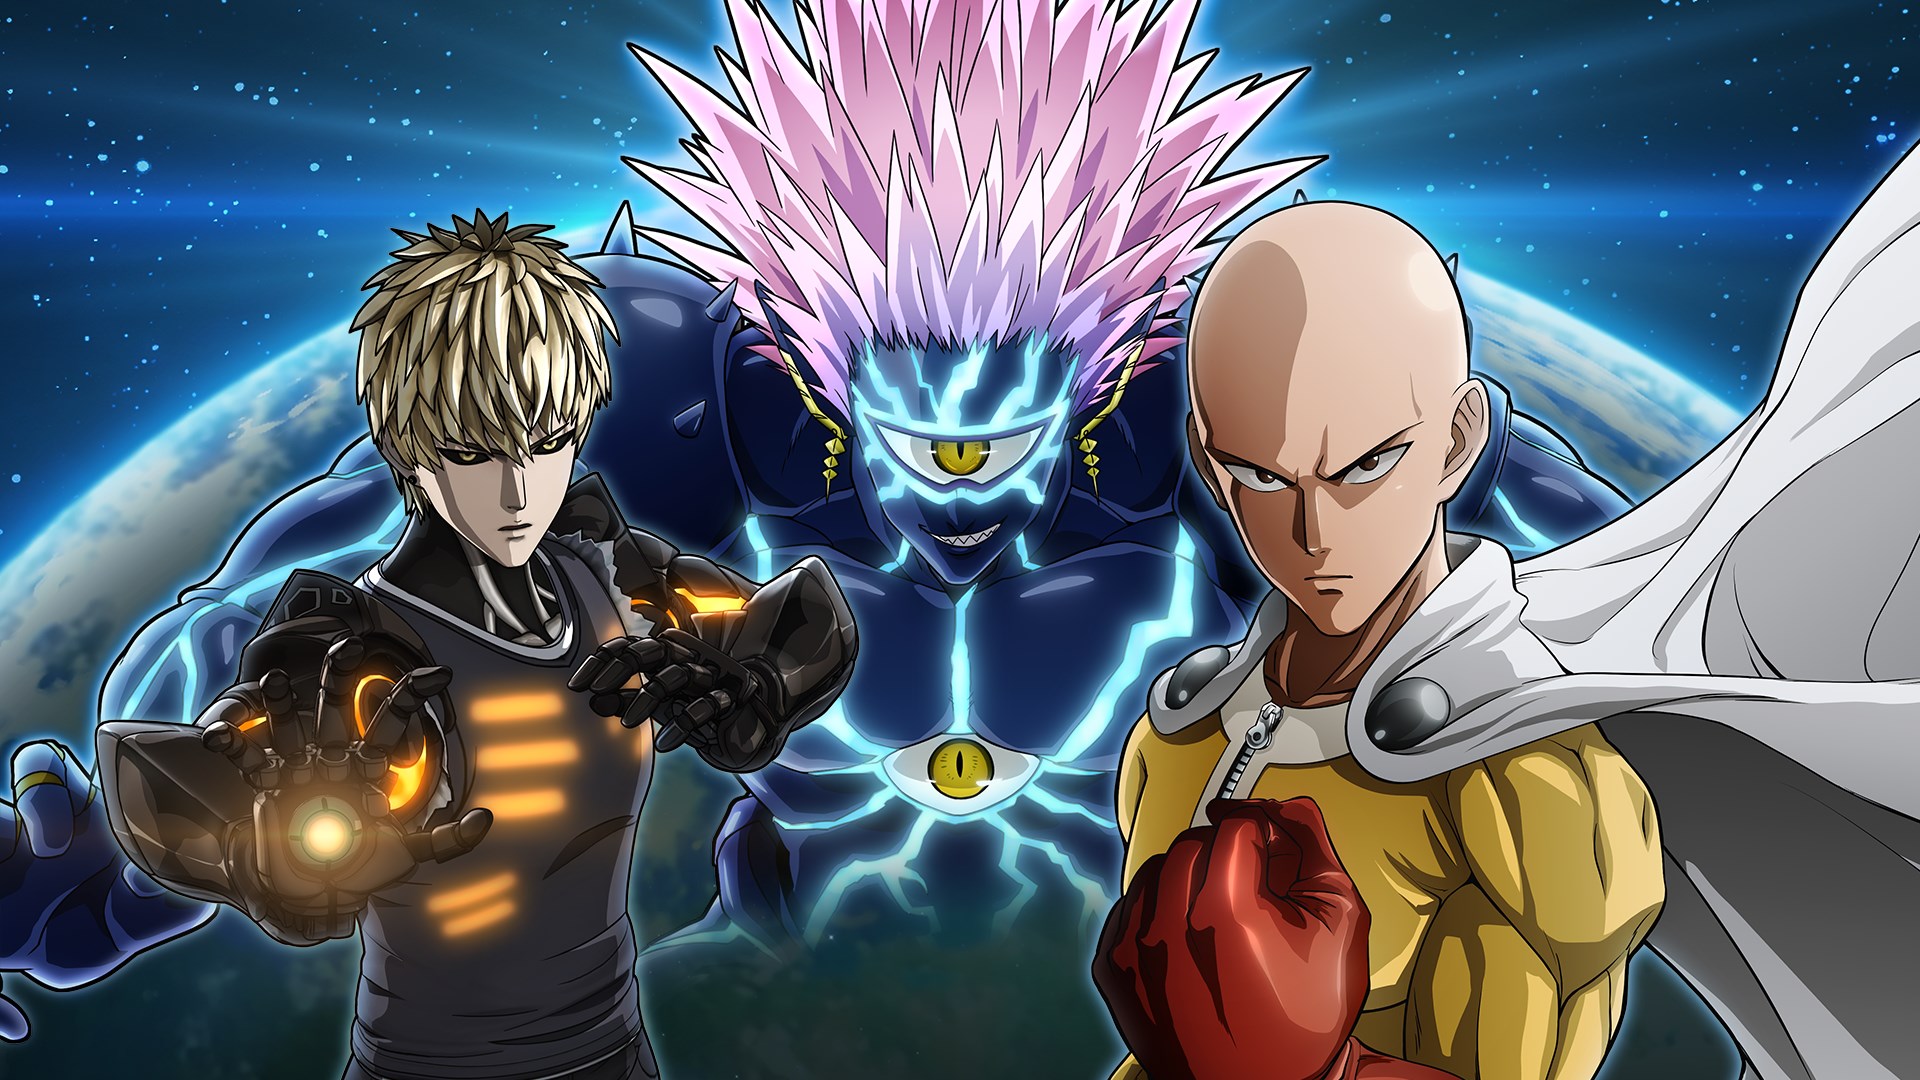 ONE PUNCH MAN A HERO NOBODY KNOWS を購入 - Microsoft Store ja-JP